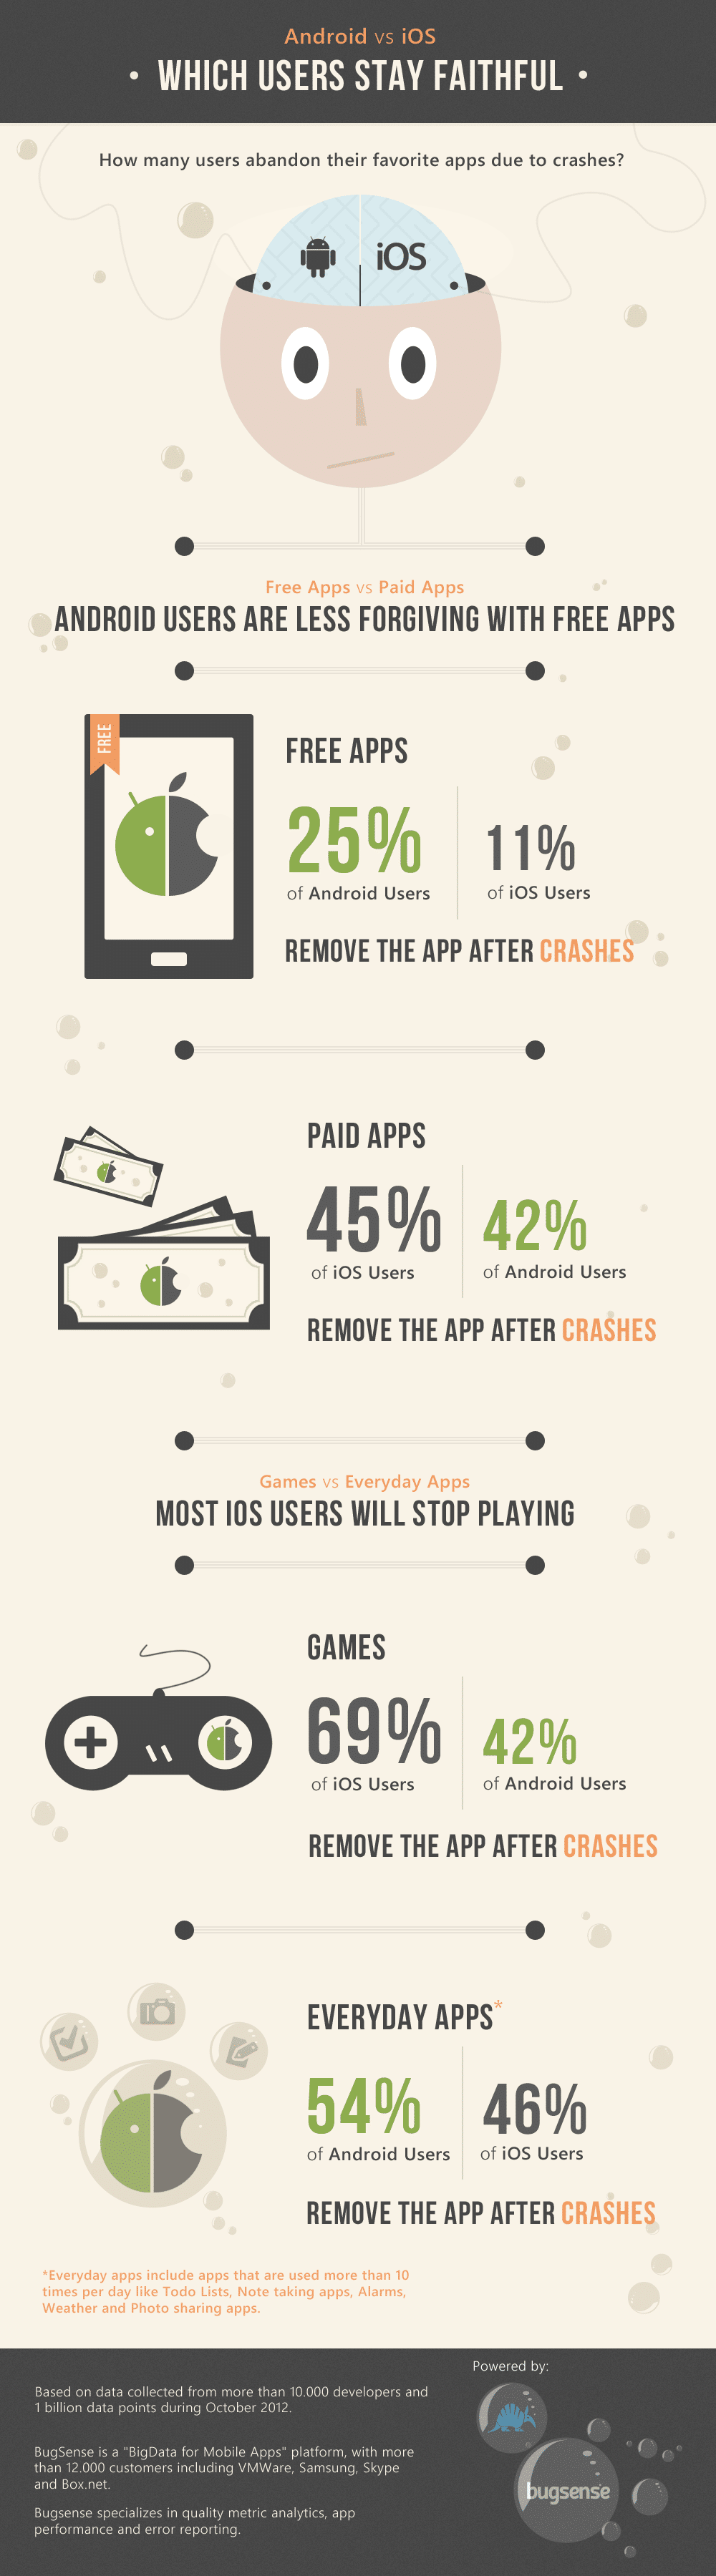 Android vs. iOS: Loyalty Among Users [Infographic]